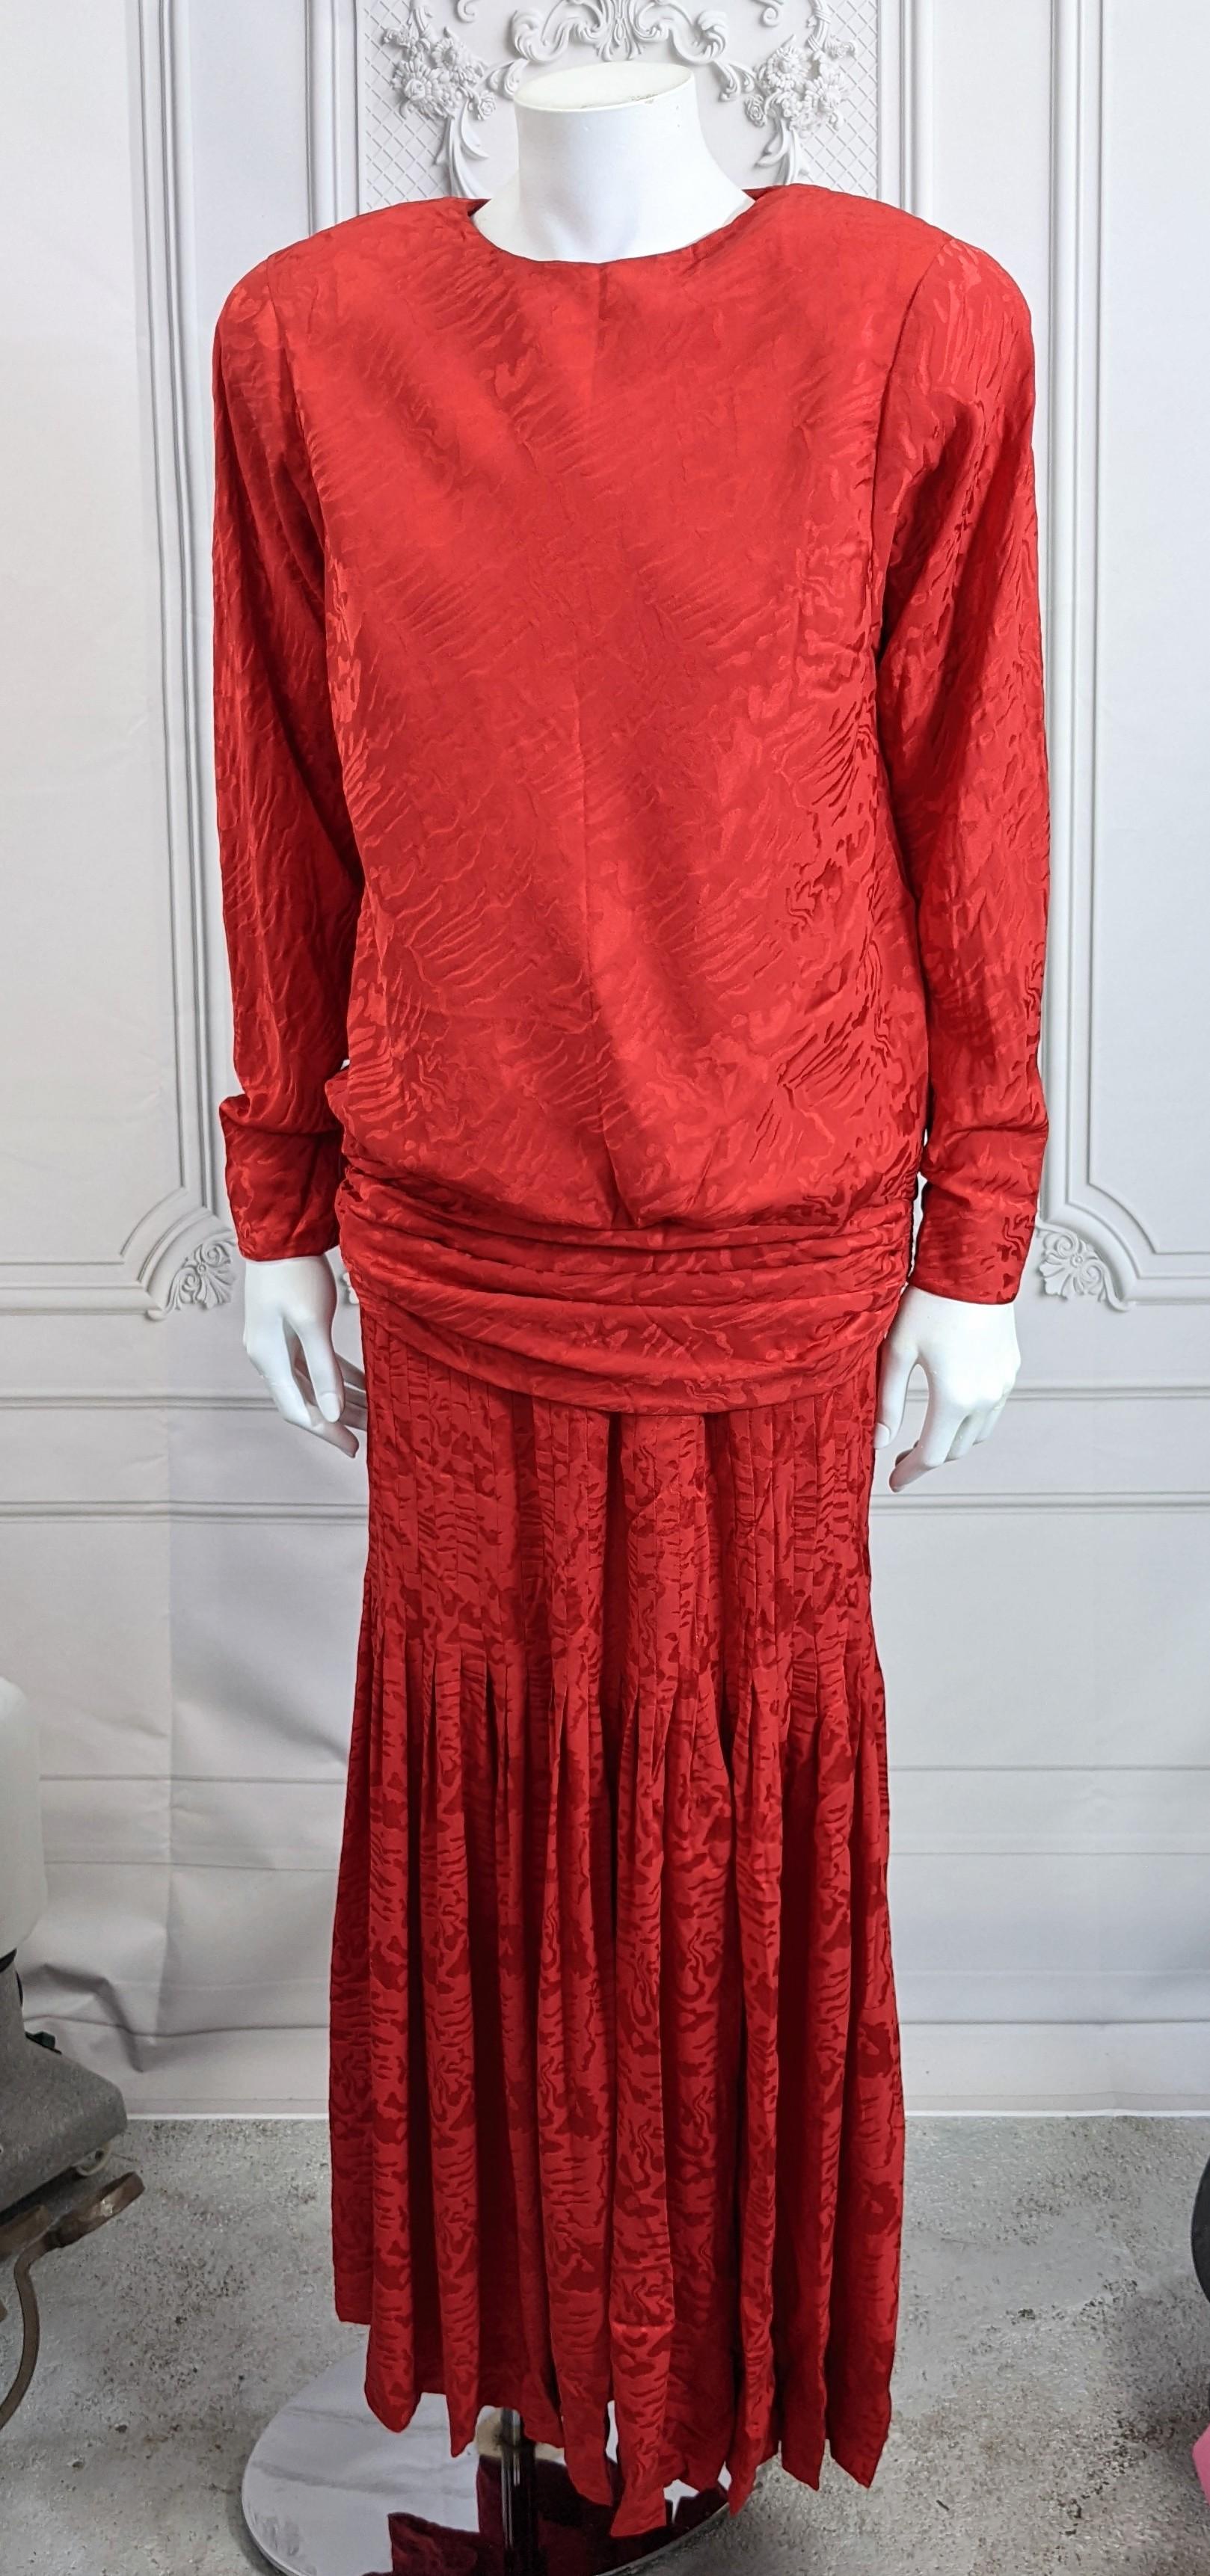 Elegant Oscar de la Renta 2 piece Silk Jacquard Evening Gown in vibrant red crepe de chine. Composed of a strong shouldered bias cut top which is bloused into a tight gathered hip band. The slim skirt has dozens of tucks which release into dramatic